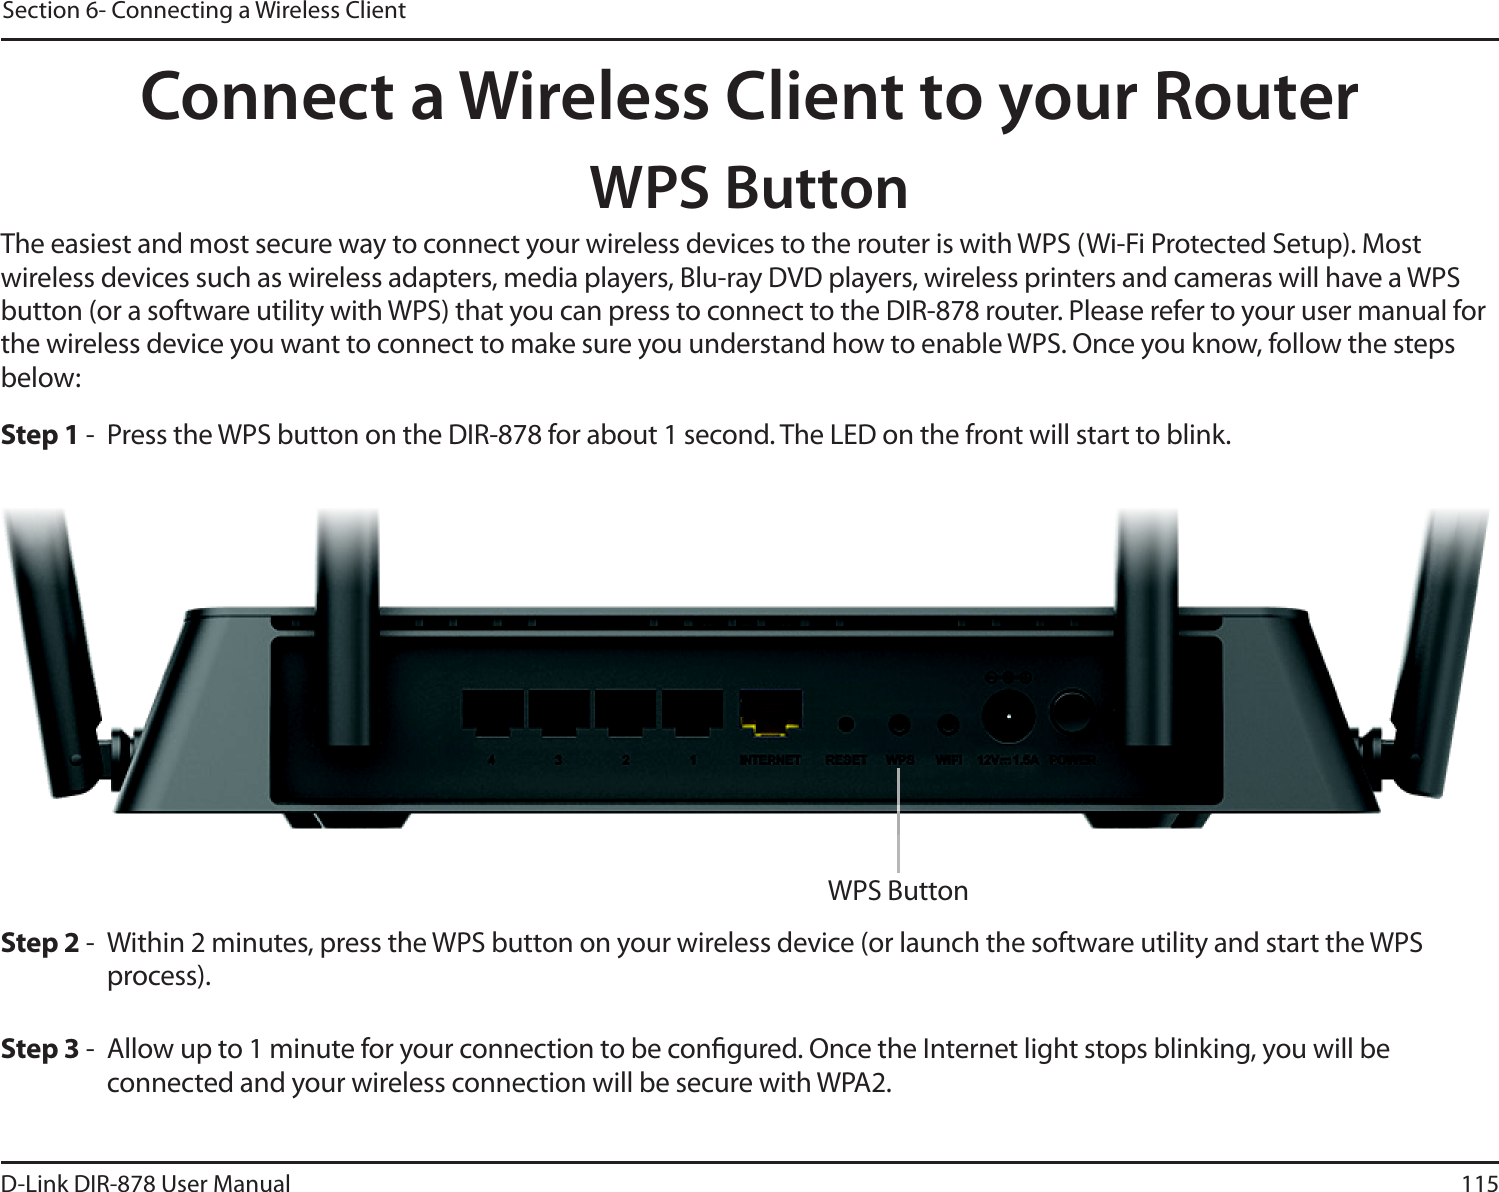 115D-Link DIR-878 User ManualSection 6- Connecting a Wireless ClientConnect a Wireless Client to your RouterWPS ButtonStep 2 - Within 2 minutes, press the WPS button on your wireless device (or launch the software utility and start the WPS process).The easiest and most secure way to connect your wireless devices to the router is with WPS (Wi-Fi Protected Setup). Most wireless devices such as wireless adapters, media players, Blu-ray DVD players, wireless printers and cameras will have a WPS button (or a software utility with WPS) that you can press to connect to the DIR-878 router. Please refer to your user manual for the wireless device you want to connect to make sure you understand how to enable WPS. Once you know, follow the steps below:Step 1 - Press the WPS button on the DIR-878 for about 1 second. The LED on the front will start to blink.Step 3 - Allow up to 1 minute for your connection to be congured. Once the Internet light stops blinking, you will be connected and your wireless connection will be secure with WPA2.WPS Button